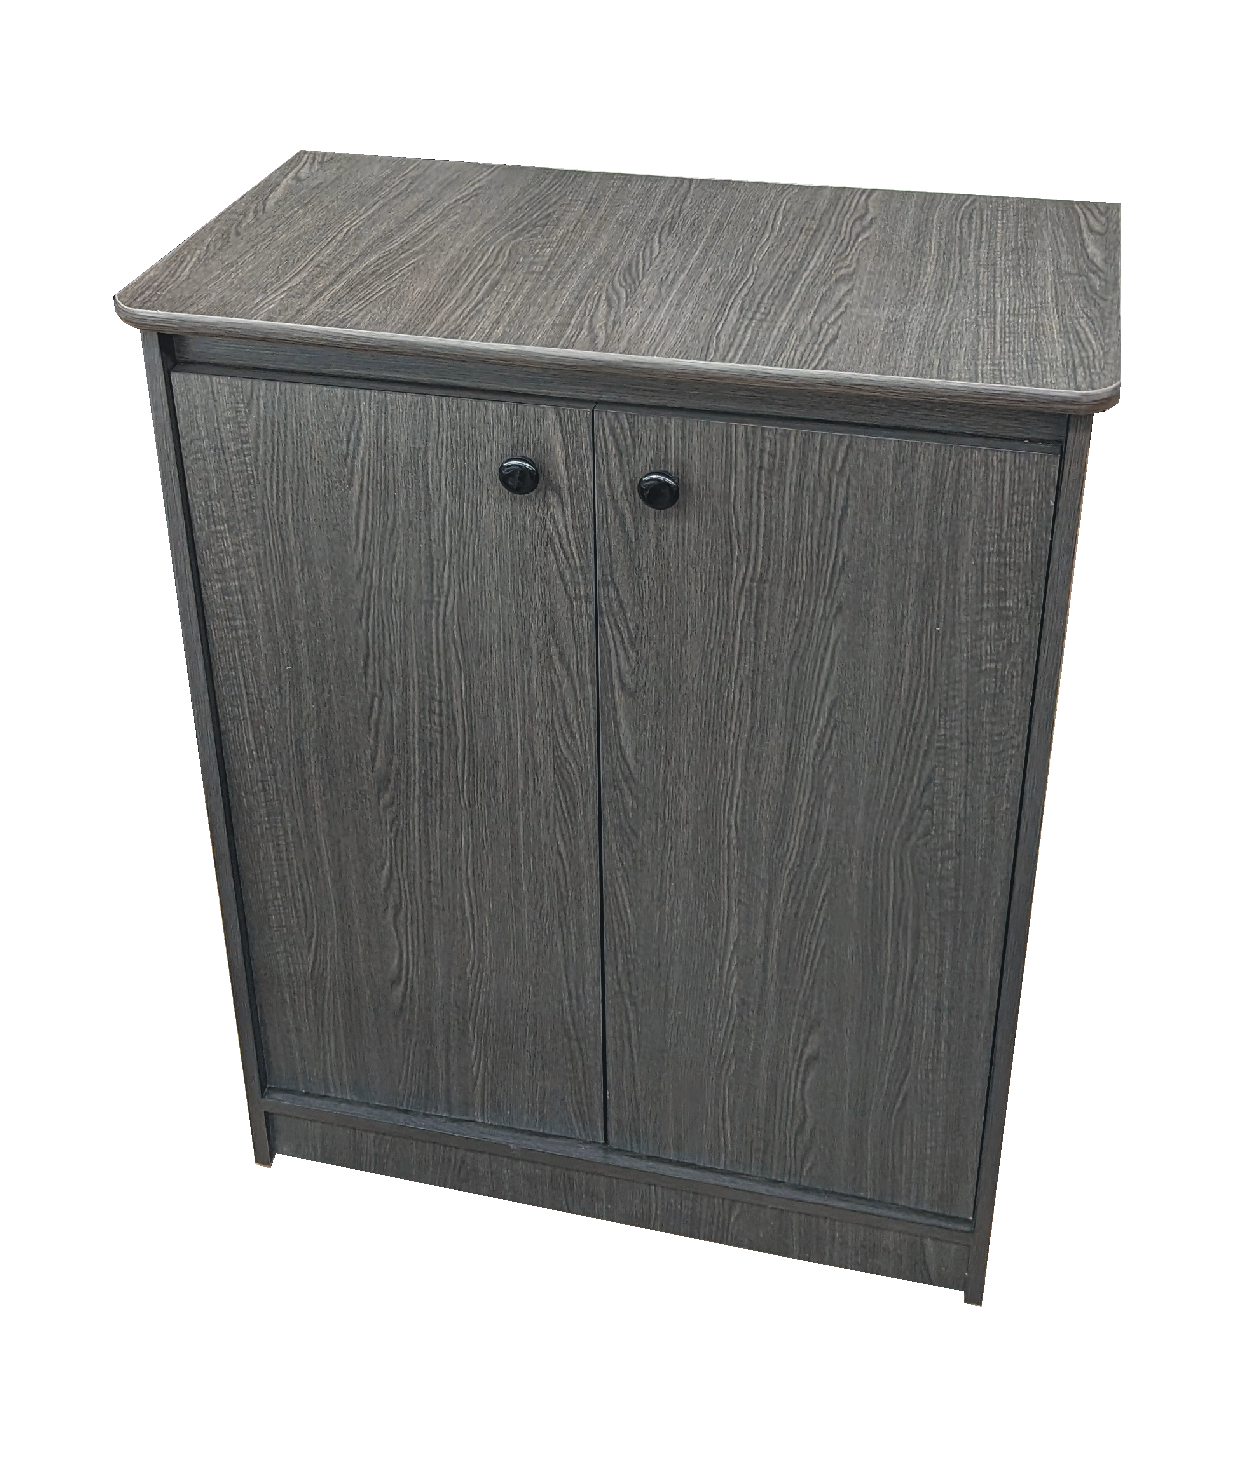 STR 3037 Storage Unit - Available in various colours